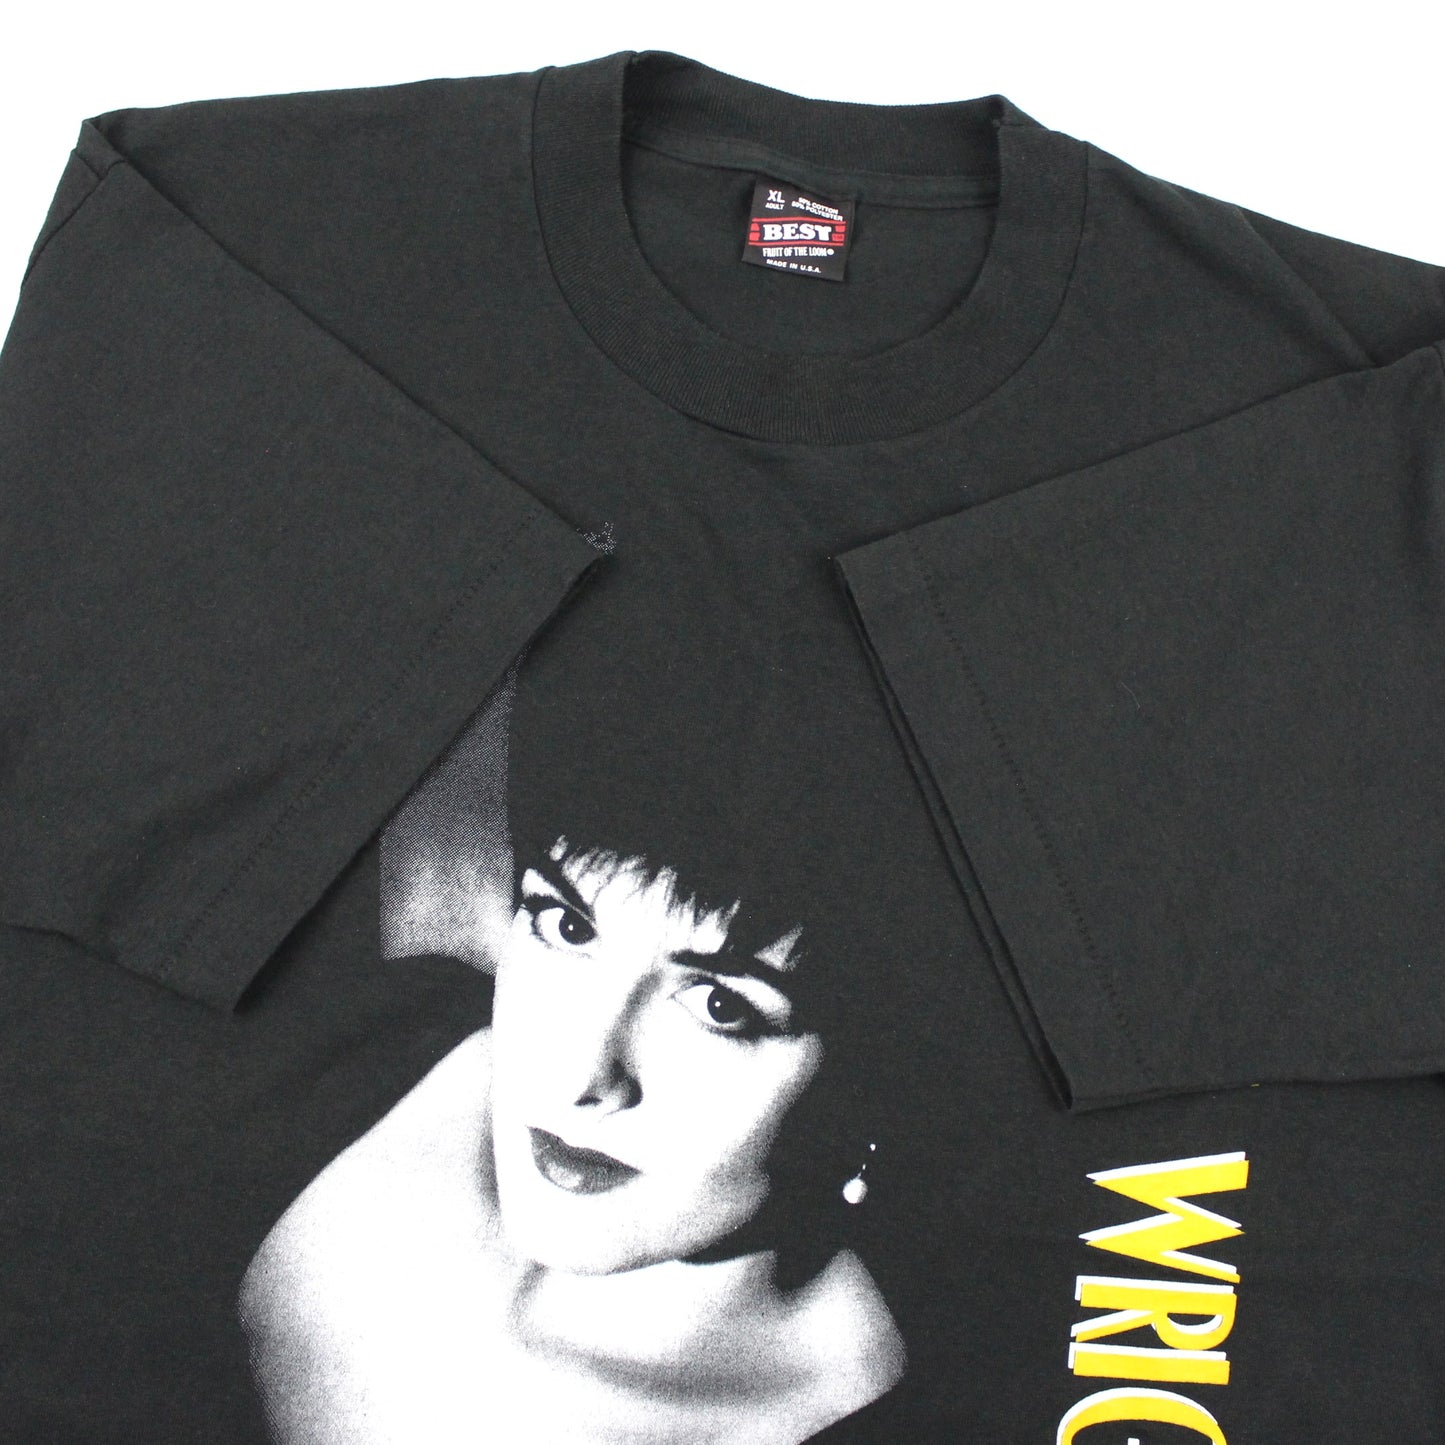 1993 Michelle Wright Single Stitch T-Shirt, Fruit of the Loom Best Label (XL)